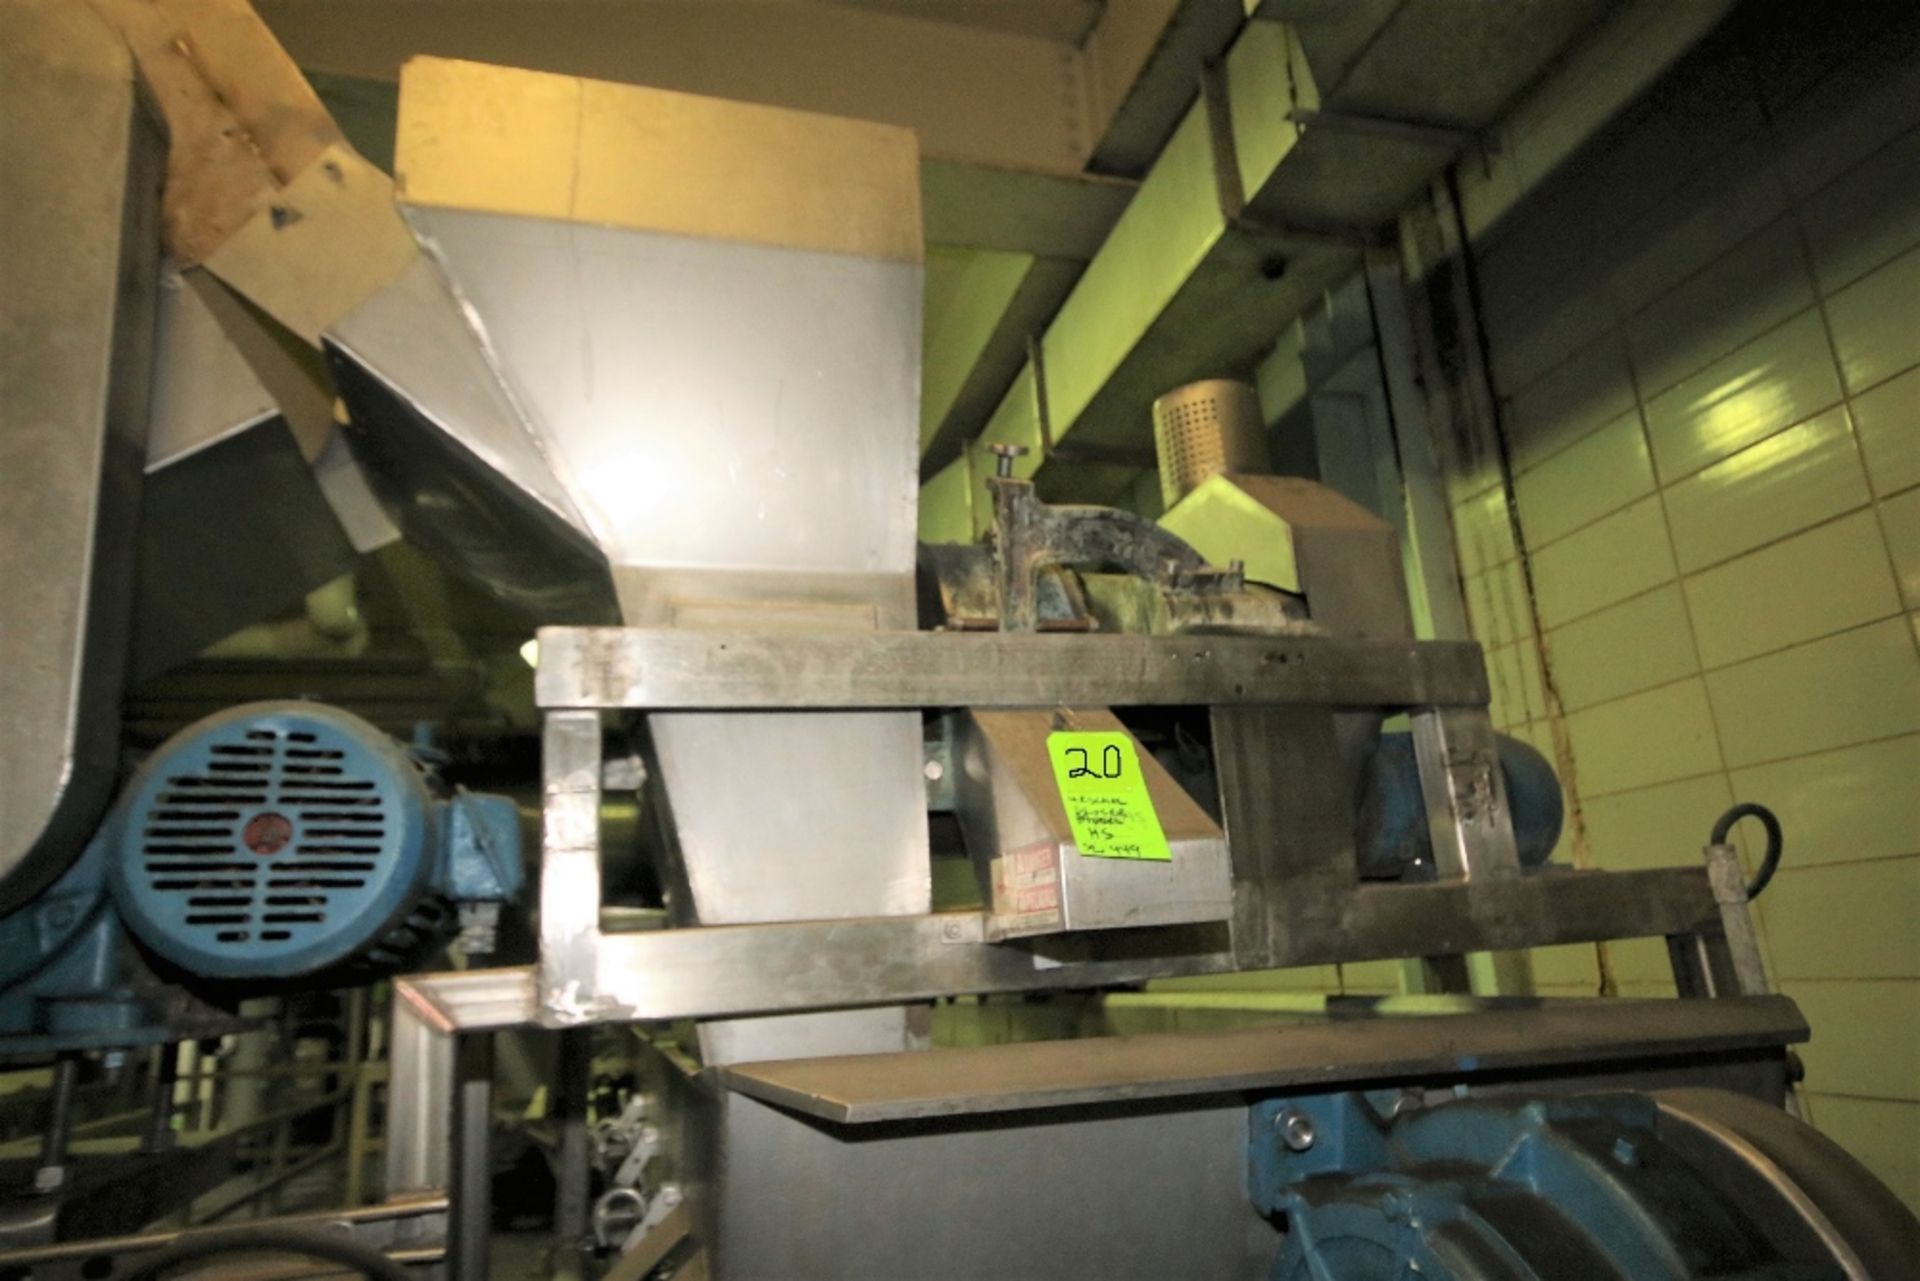 Urschel Dicer, Model HS, S/N 449, 2 hp 1730 RPM Motor, 230/460 V 3 Phase with 23" x 20" Feed - Image 3 of 4